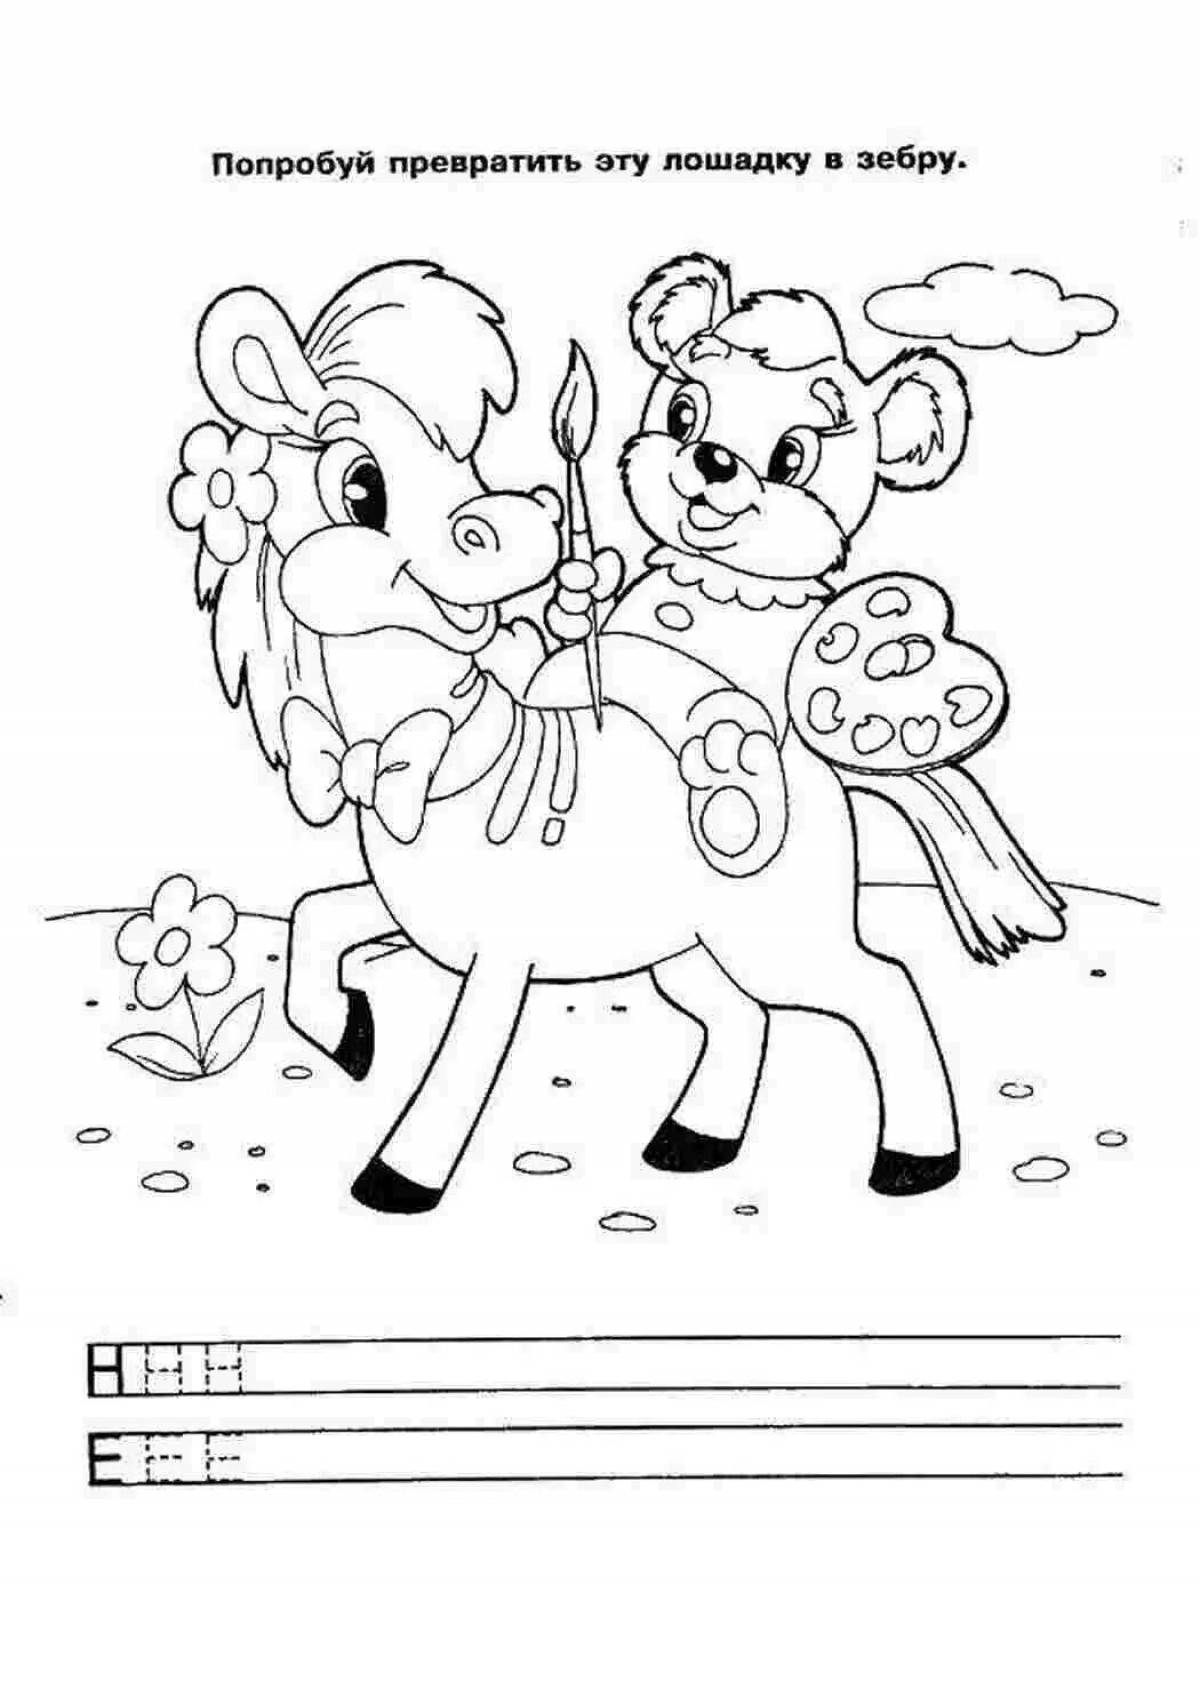 Educational coloring book for smart children 3-4 years old